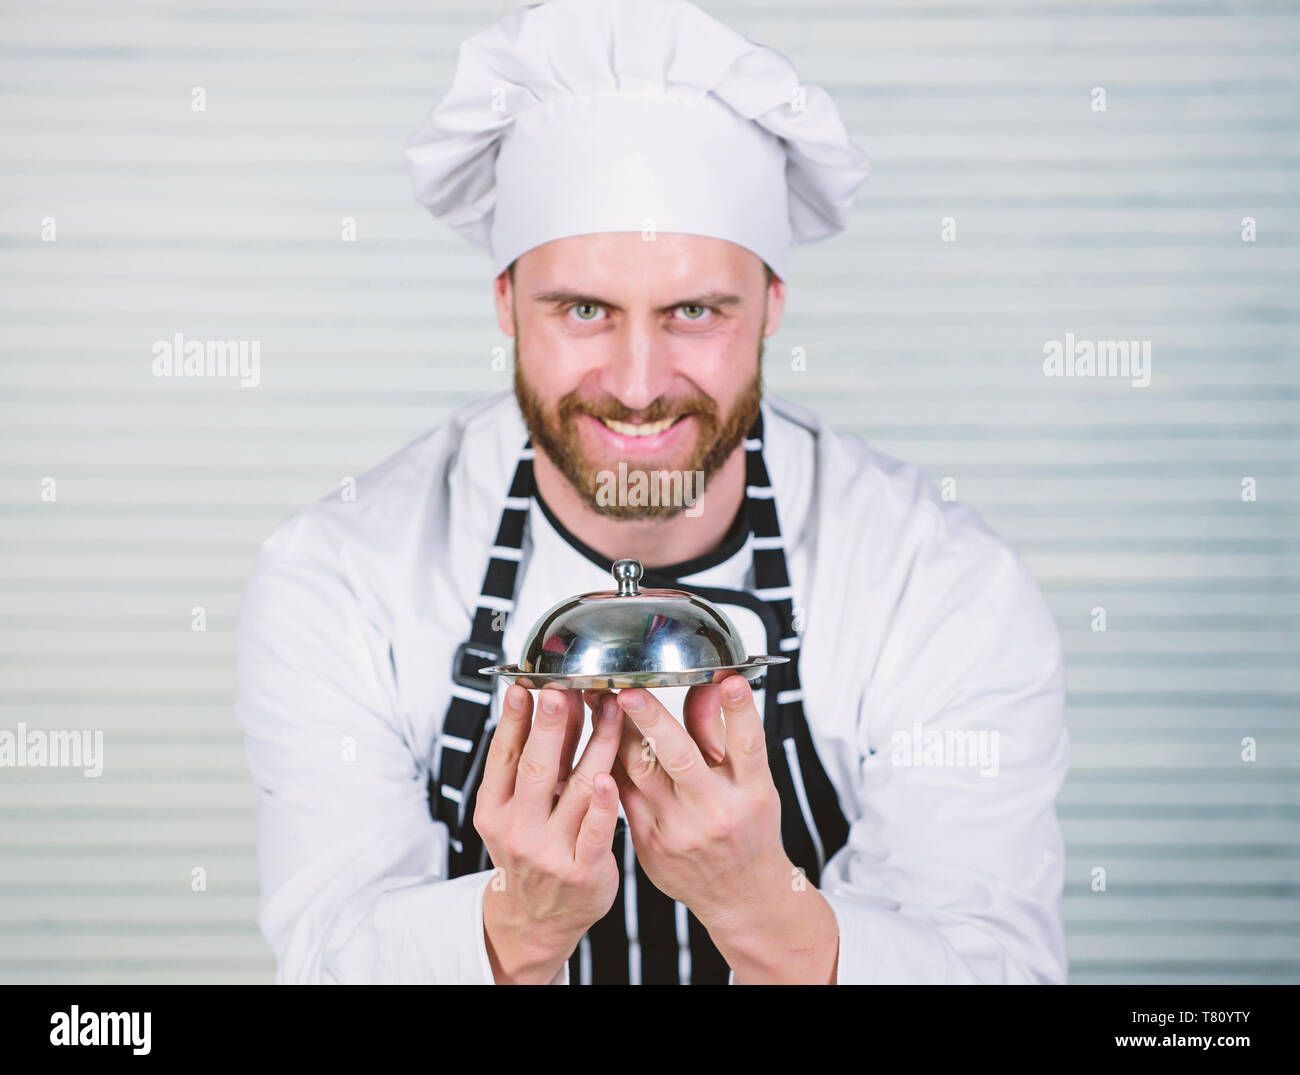 Head Cook Handsome Man In Apron And Cook Hat Chef Cook In Uniform Standing With Delicious Dish 